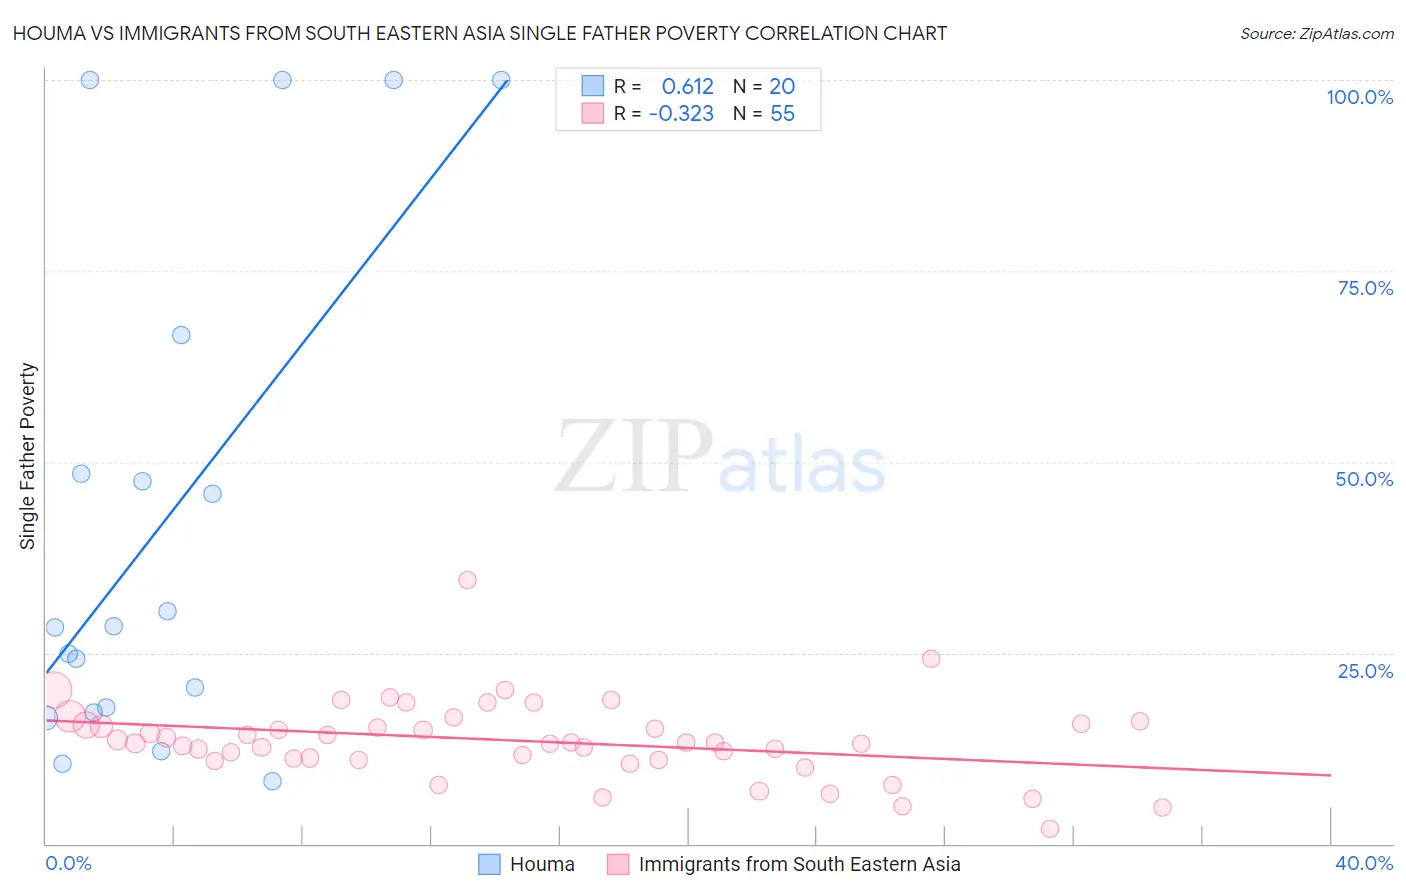 Houma vs Immigrants from South Eastern Asia Single Father Poverty